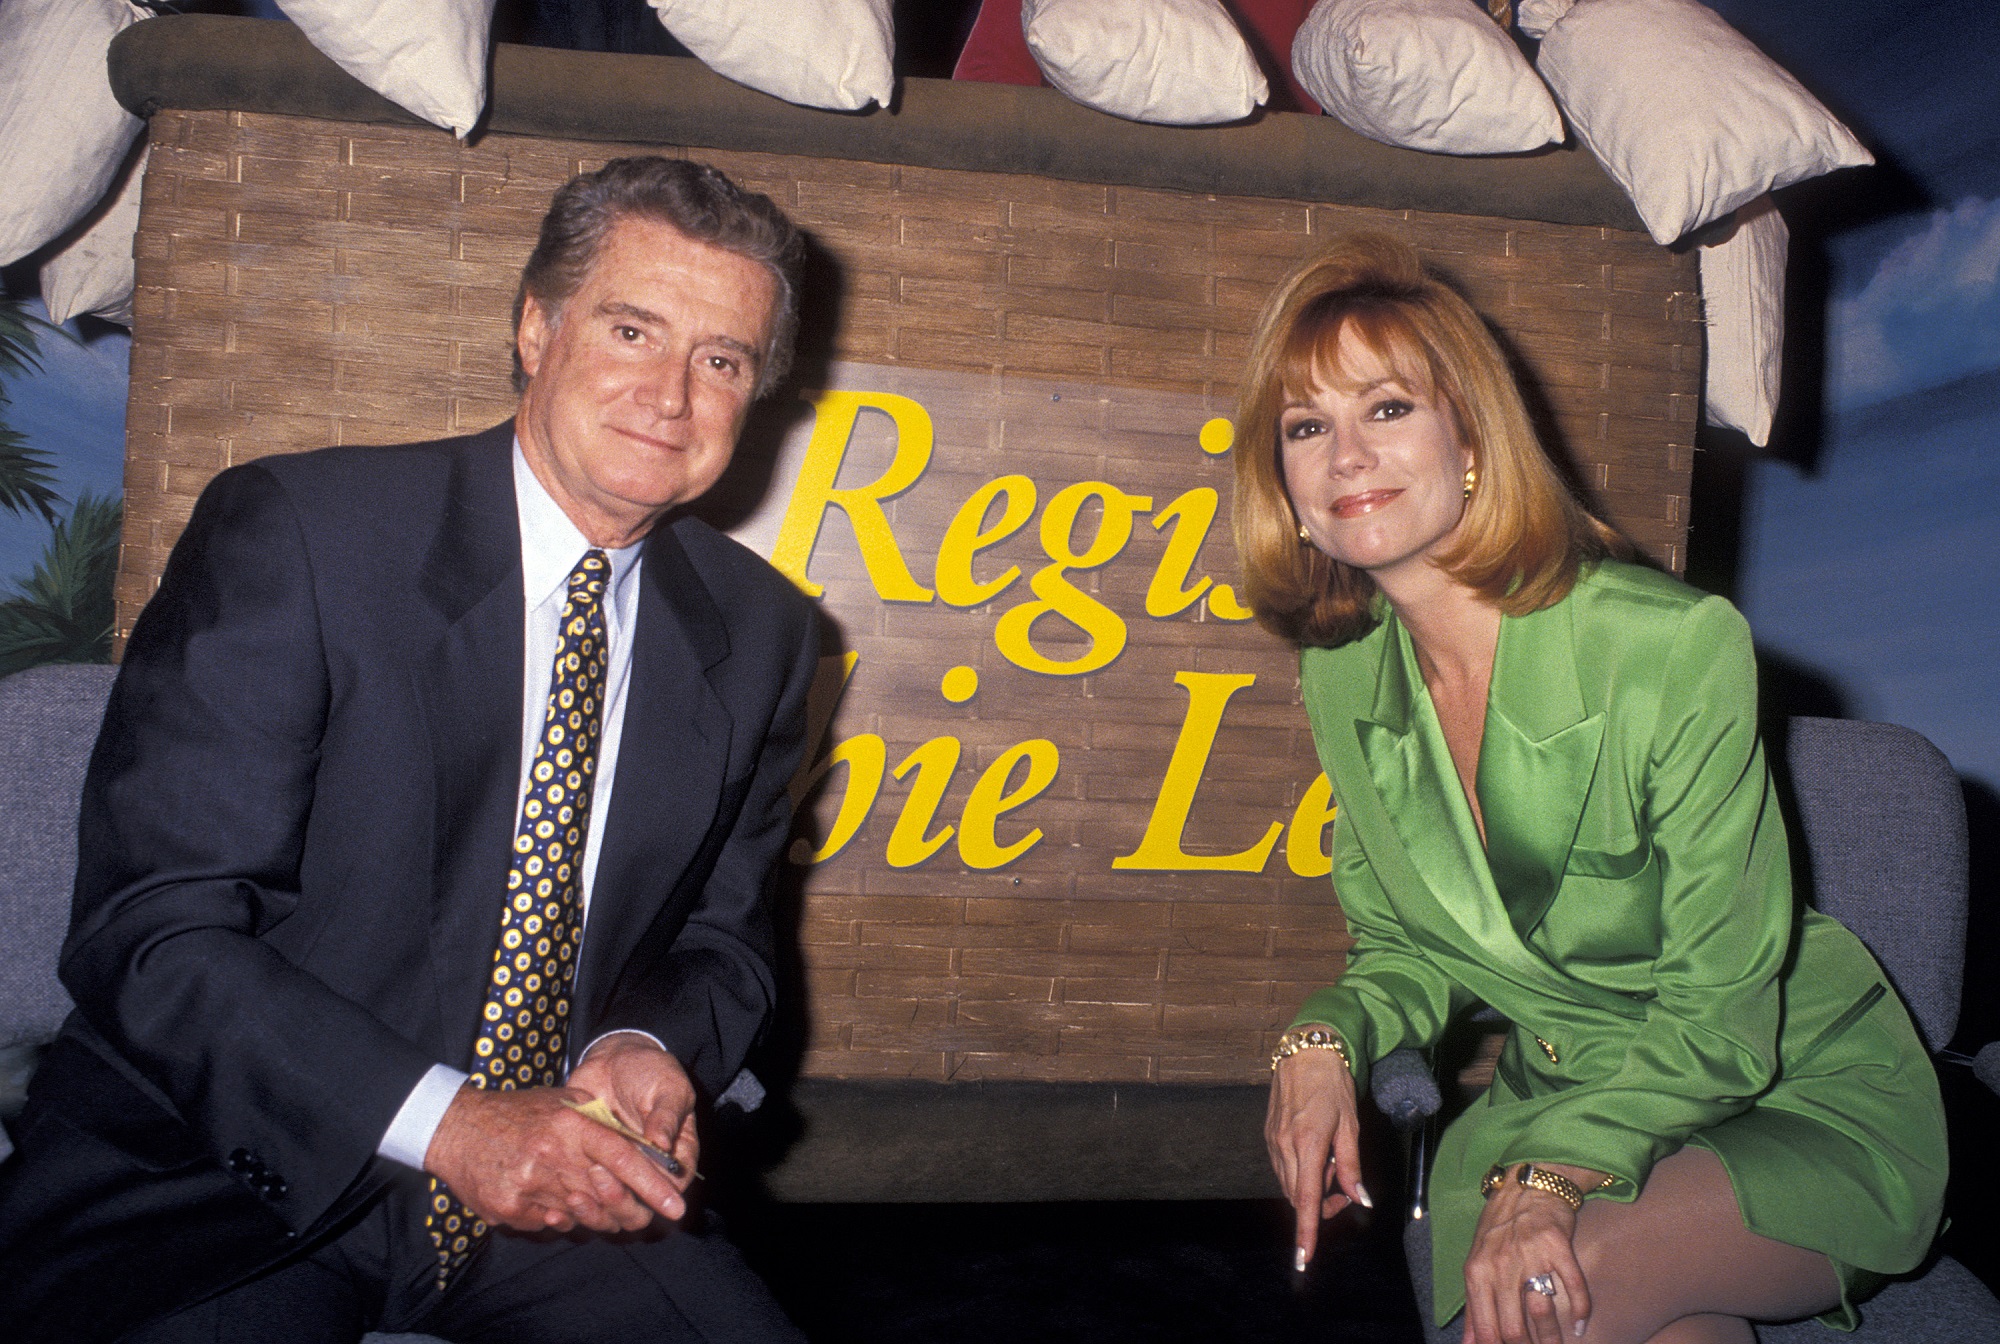 Live with REgis and Kathie Lee